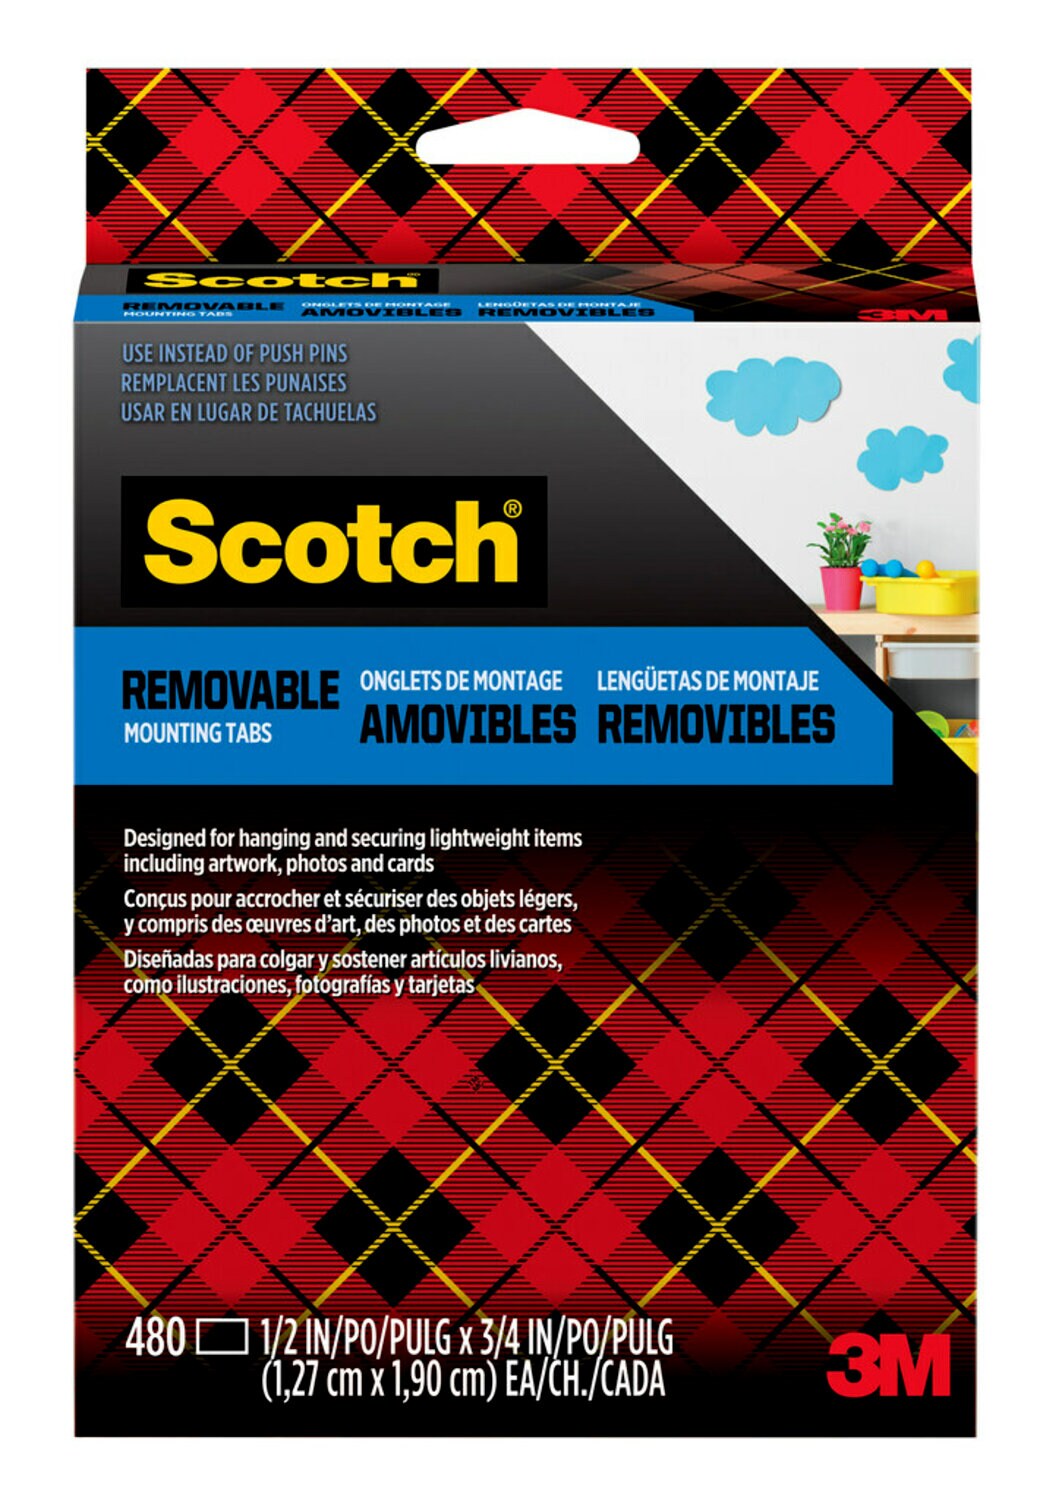 7100245530 - Scotch Removable Double-Sided Mounting Tabs 7225S-ESF, 1/2 in x 3/4 in (1.27 cm x 1.90 cm) 480/pk